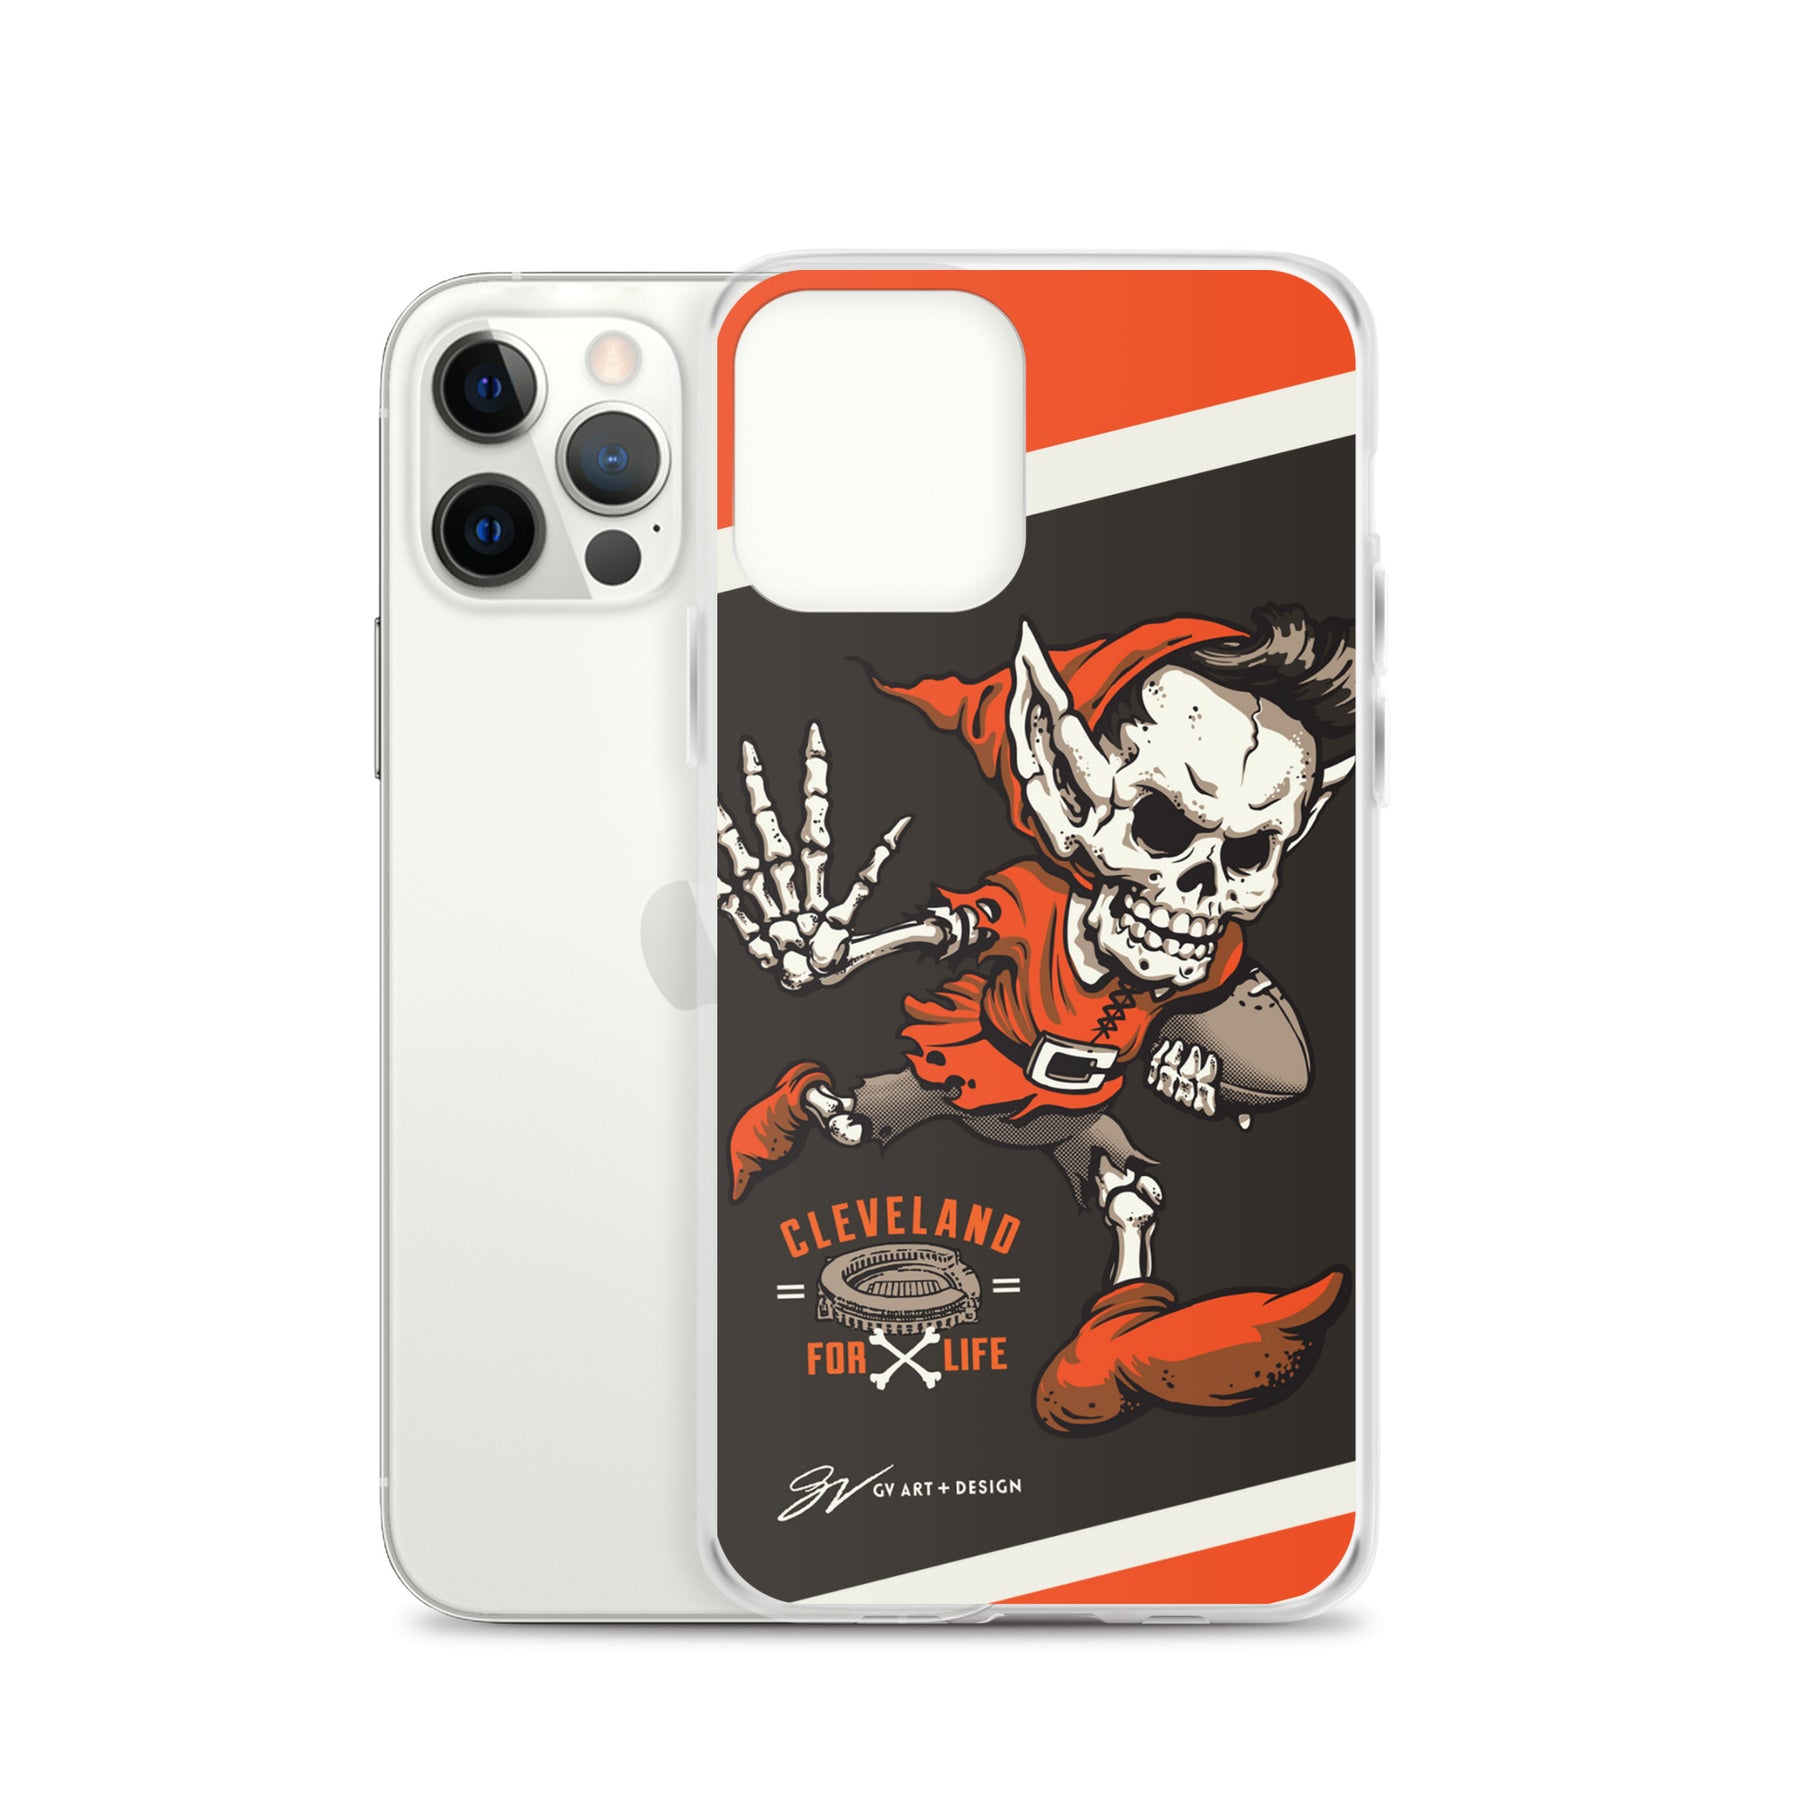 CLEVELAND INDIANS ART iPhone 12 Pro Case Cover